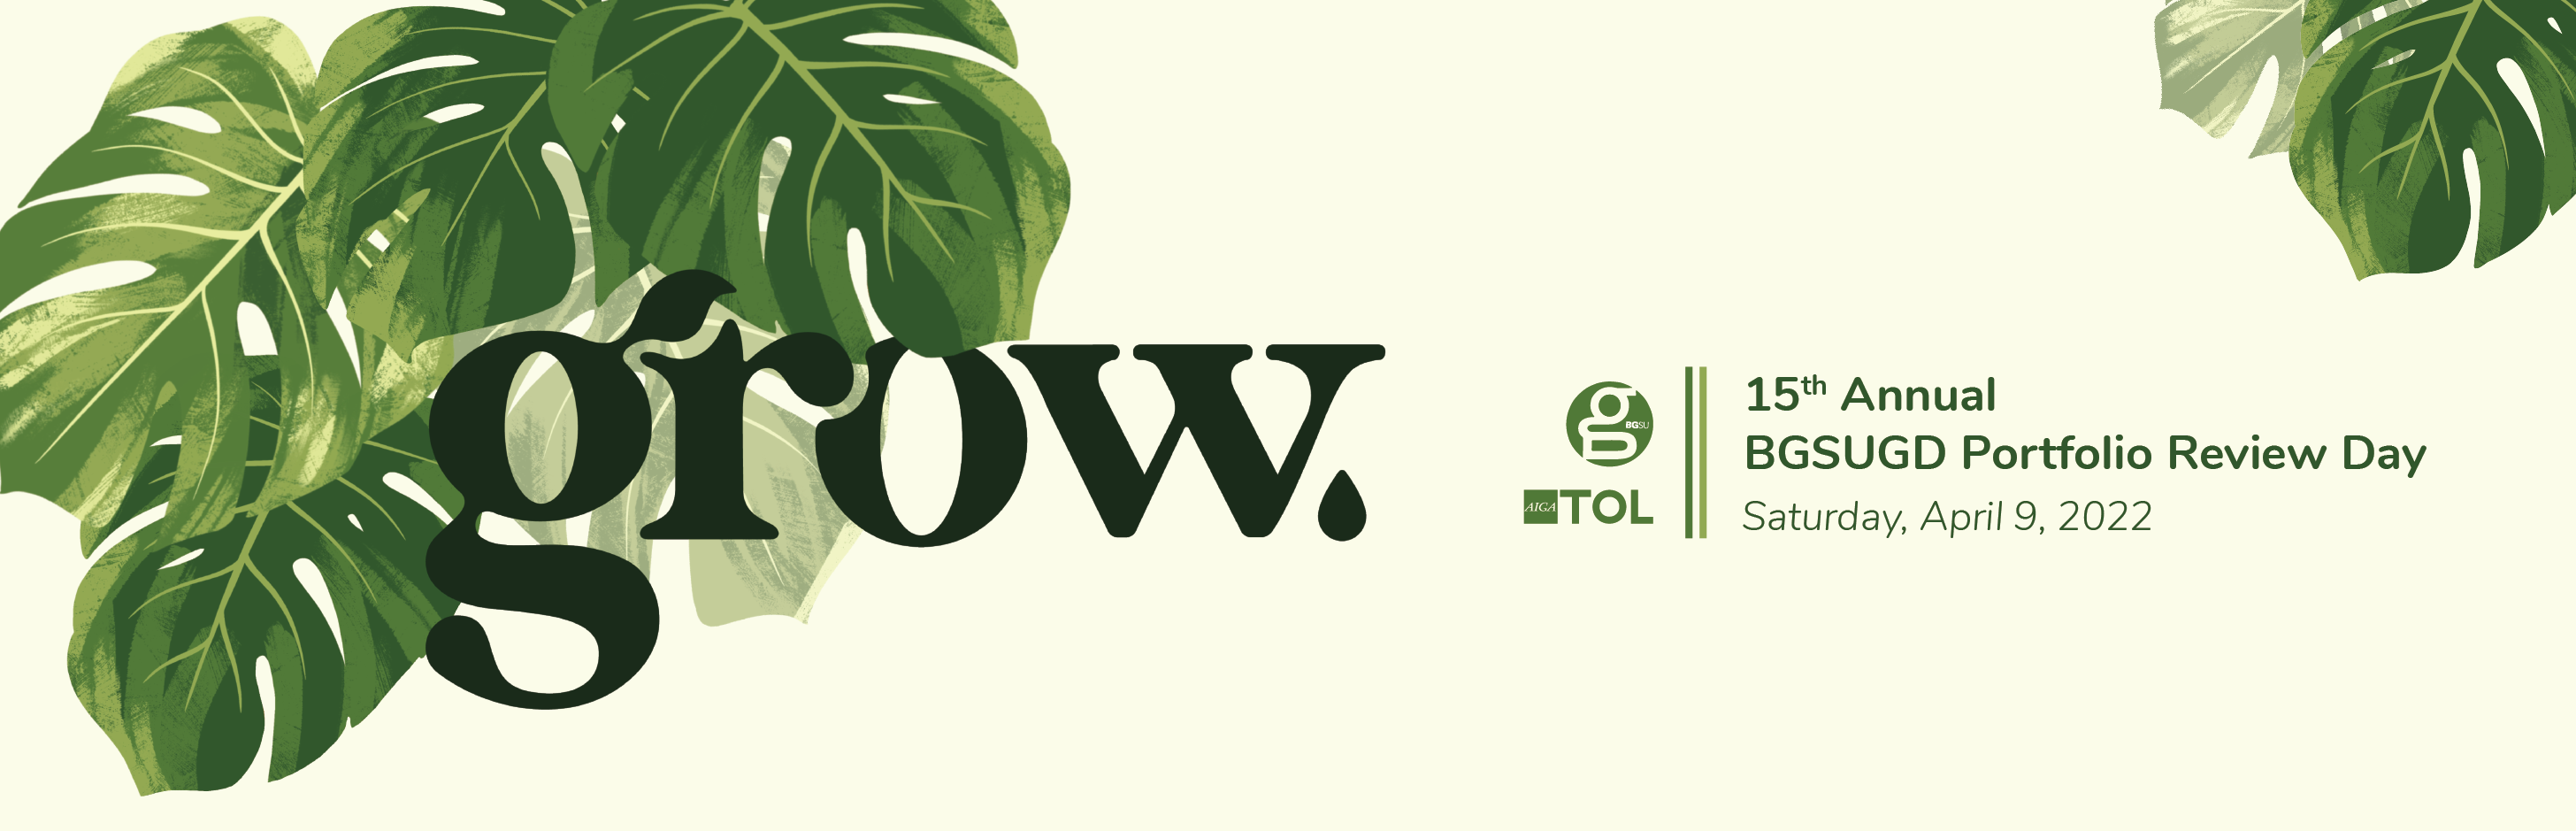 banner image of grow logo among monstera leaves. Accompanied by the AIGA Toledo Logo and BGSUGD logo, and the text "15th annual BGSUGD portfolio review day, Saturday, April 9, 2022"